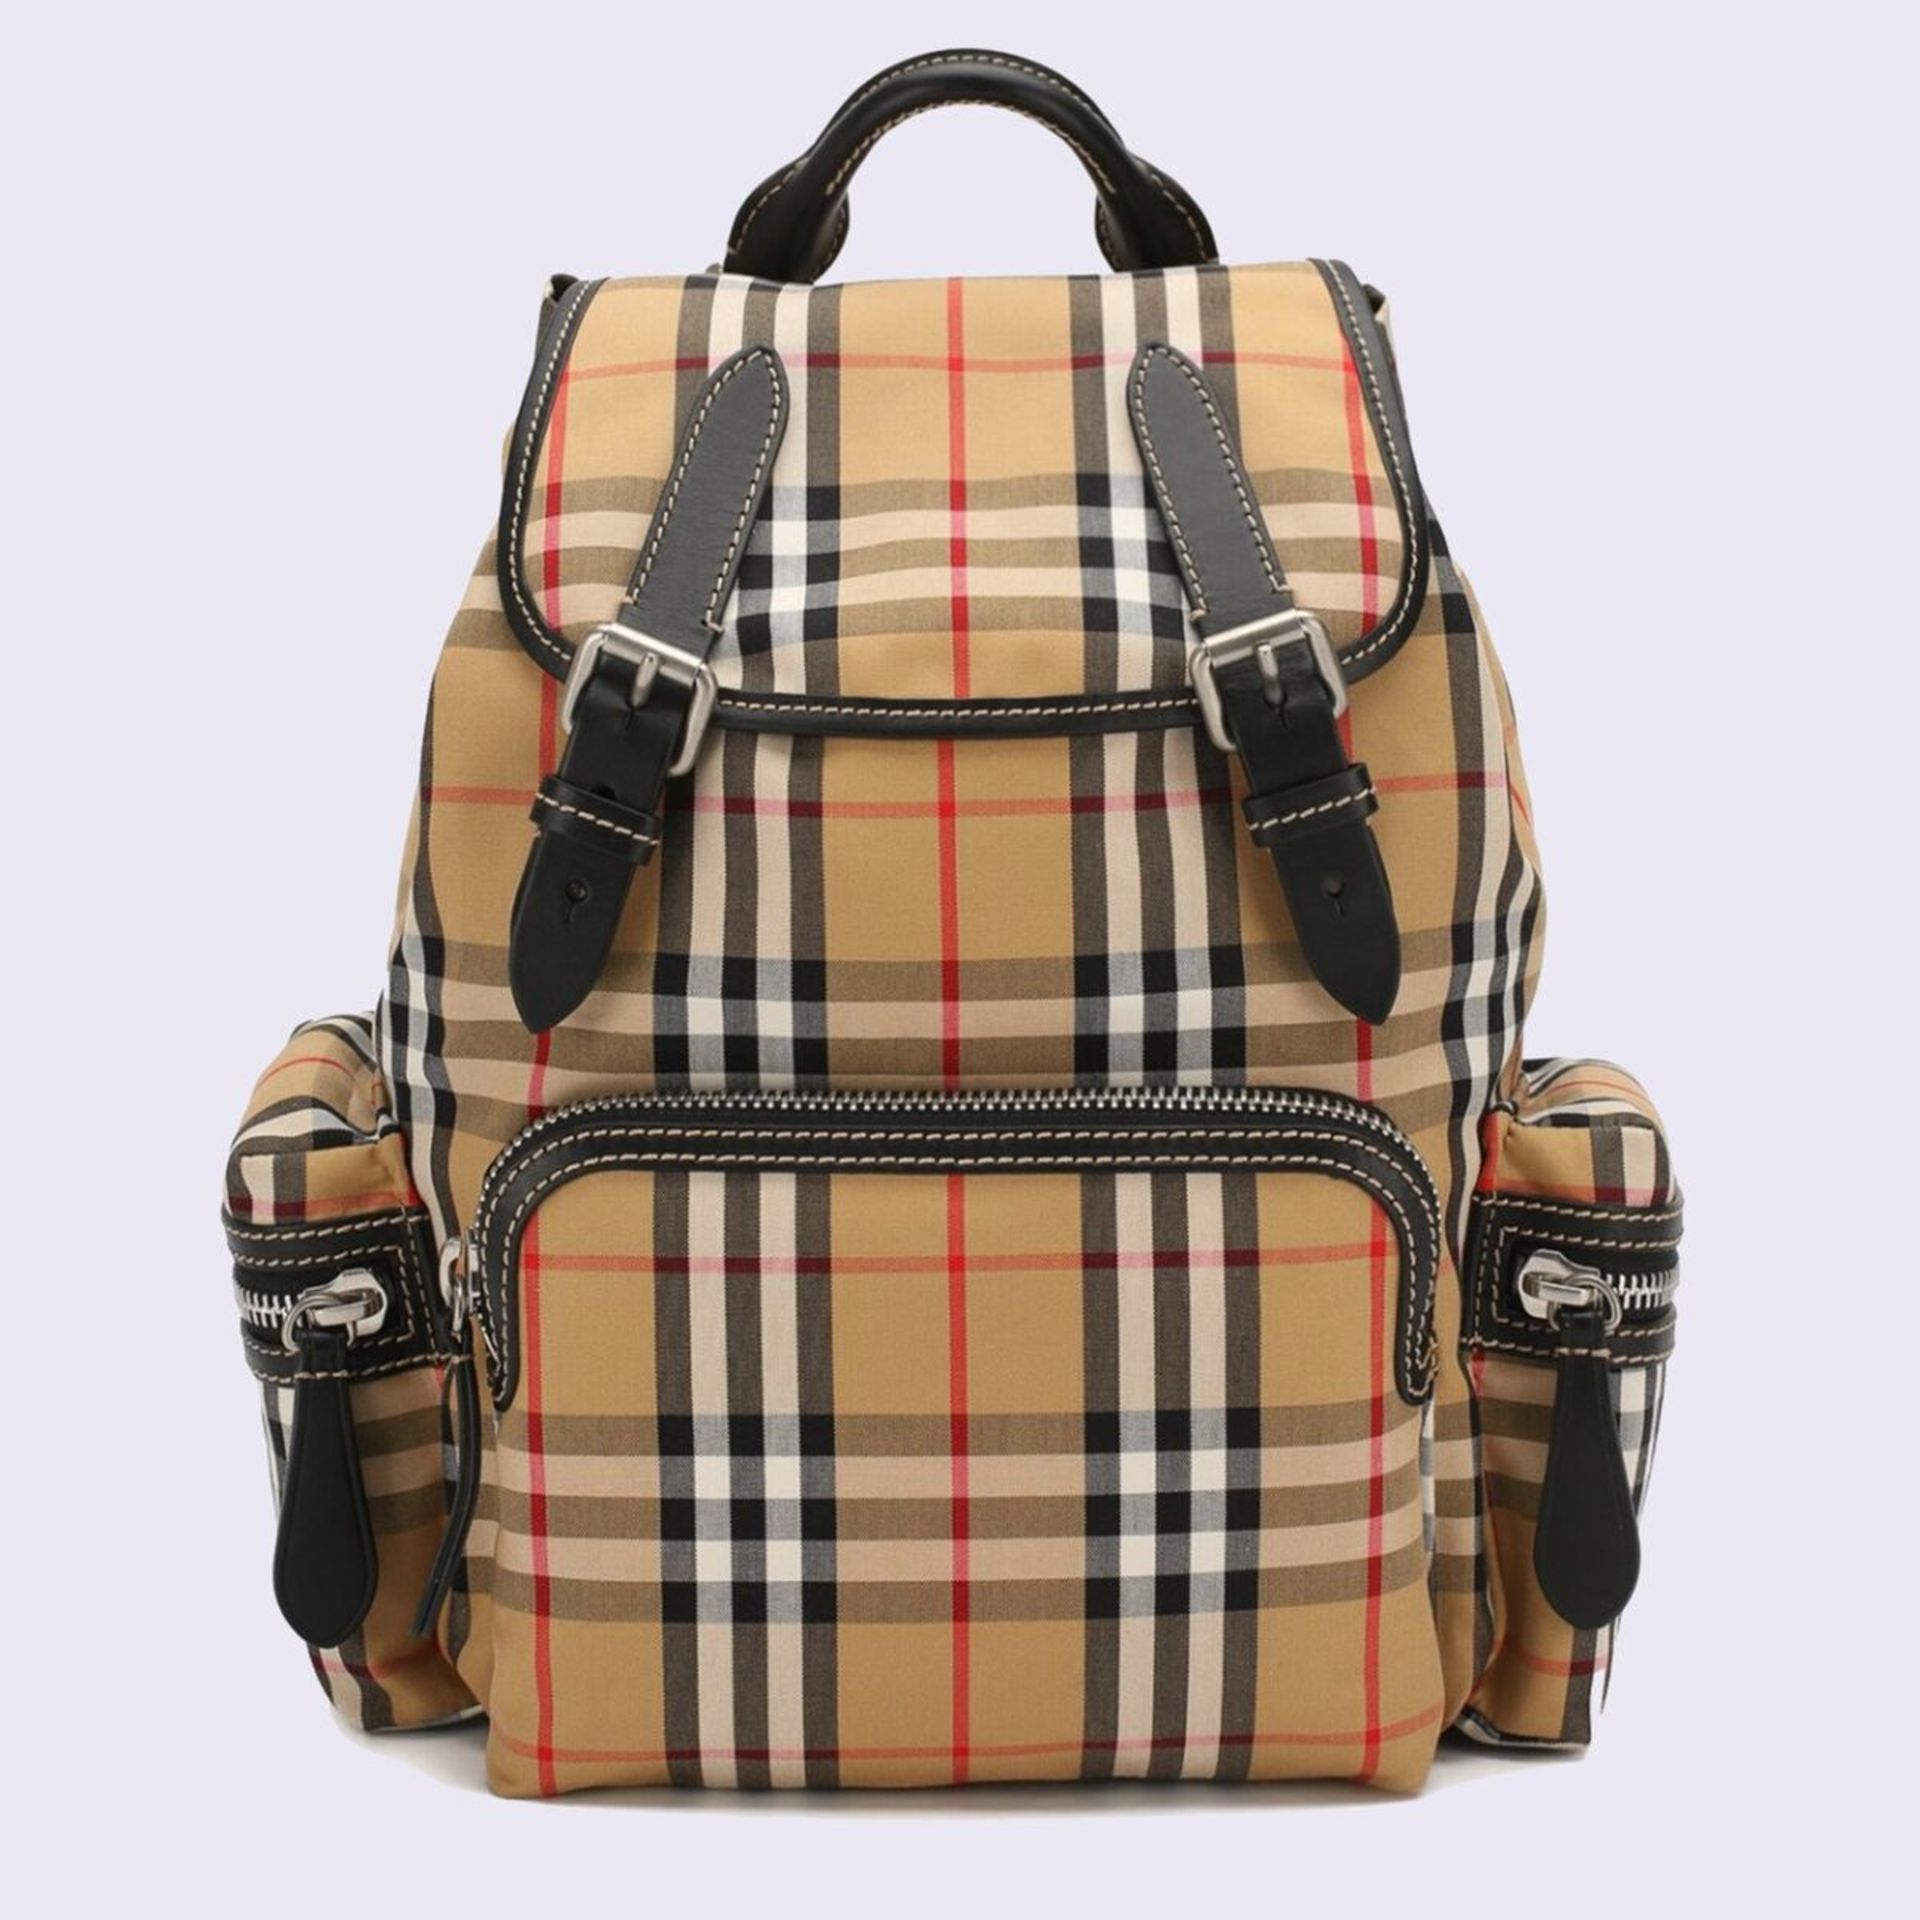 Burberry check backpack. 35x35cm - Image 2 of 9